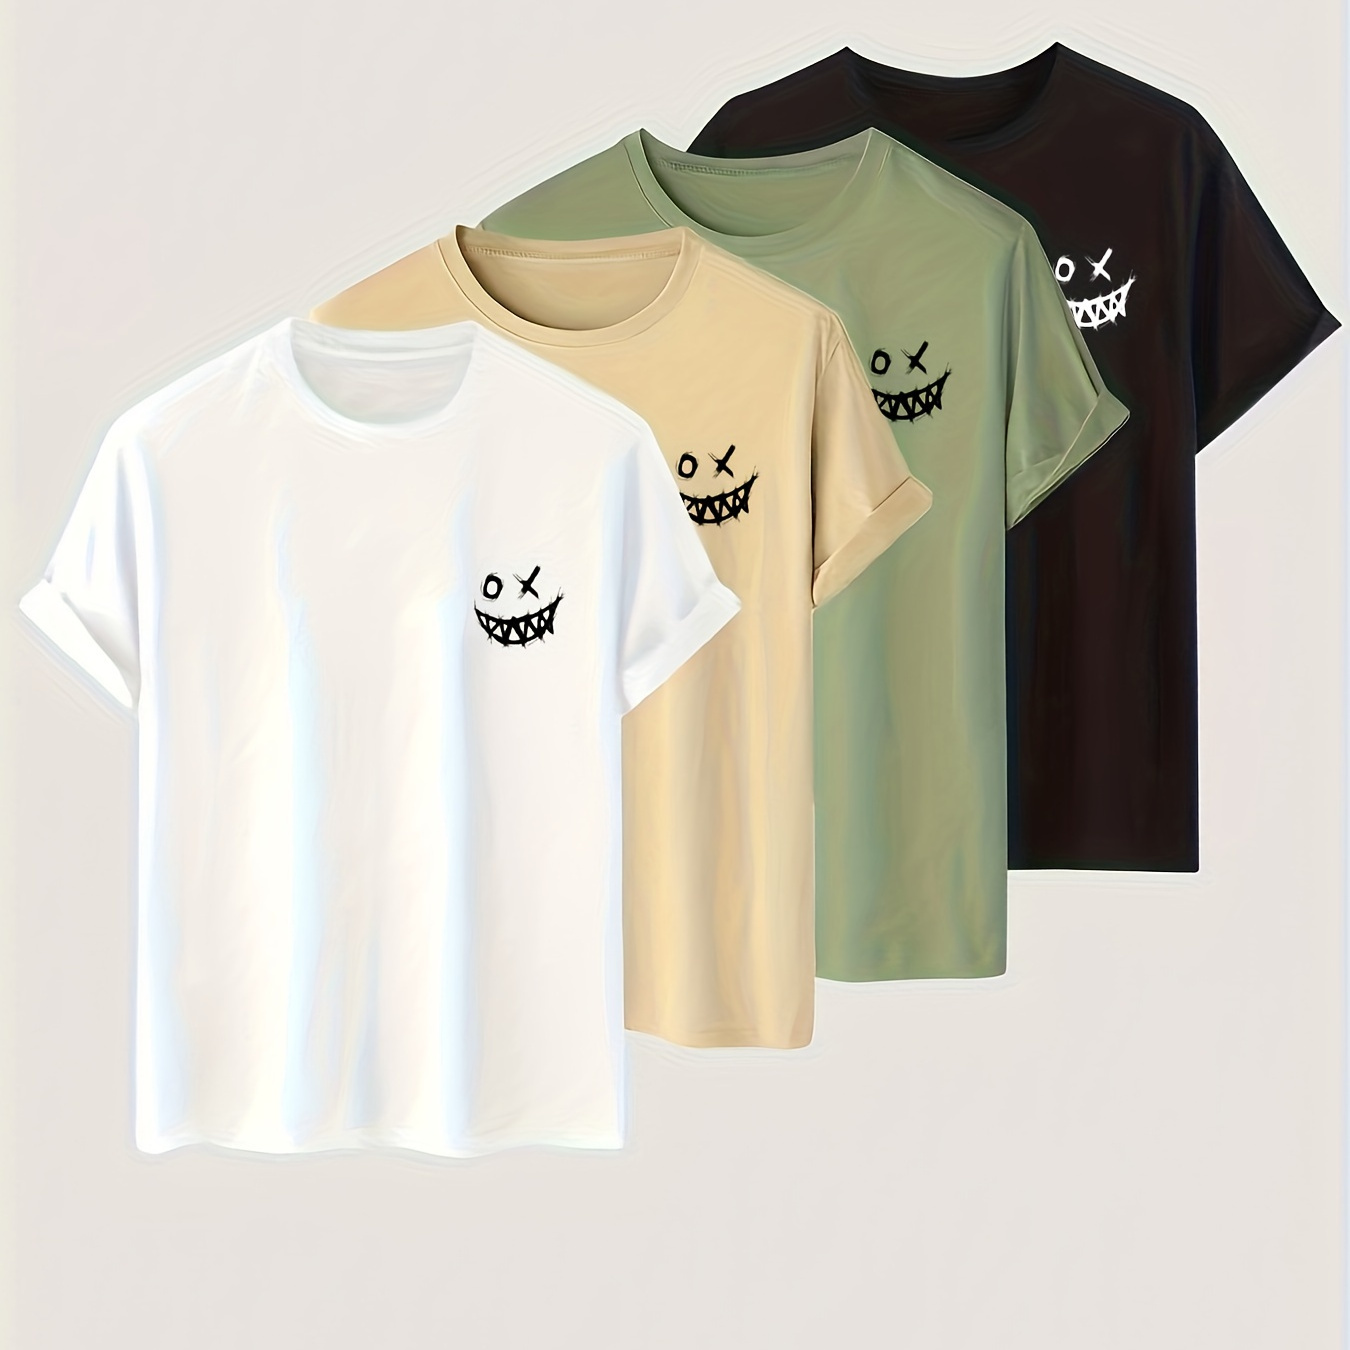 

4 Pcs Men's Smiling Face Print T-shirt, Casual Comfy Crew Neck Tee, Men's Clothing For Summer Outdoor